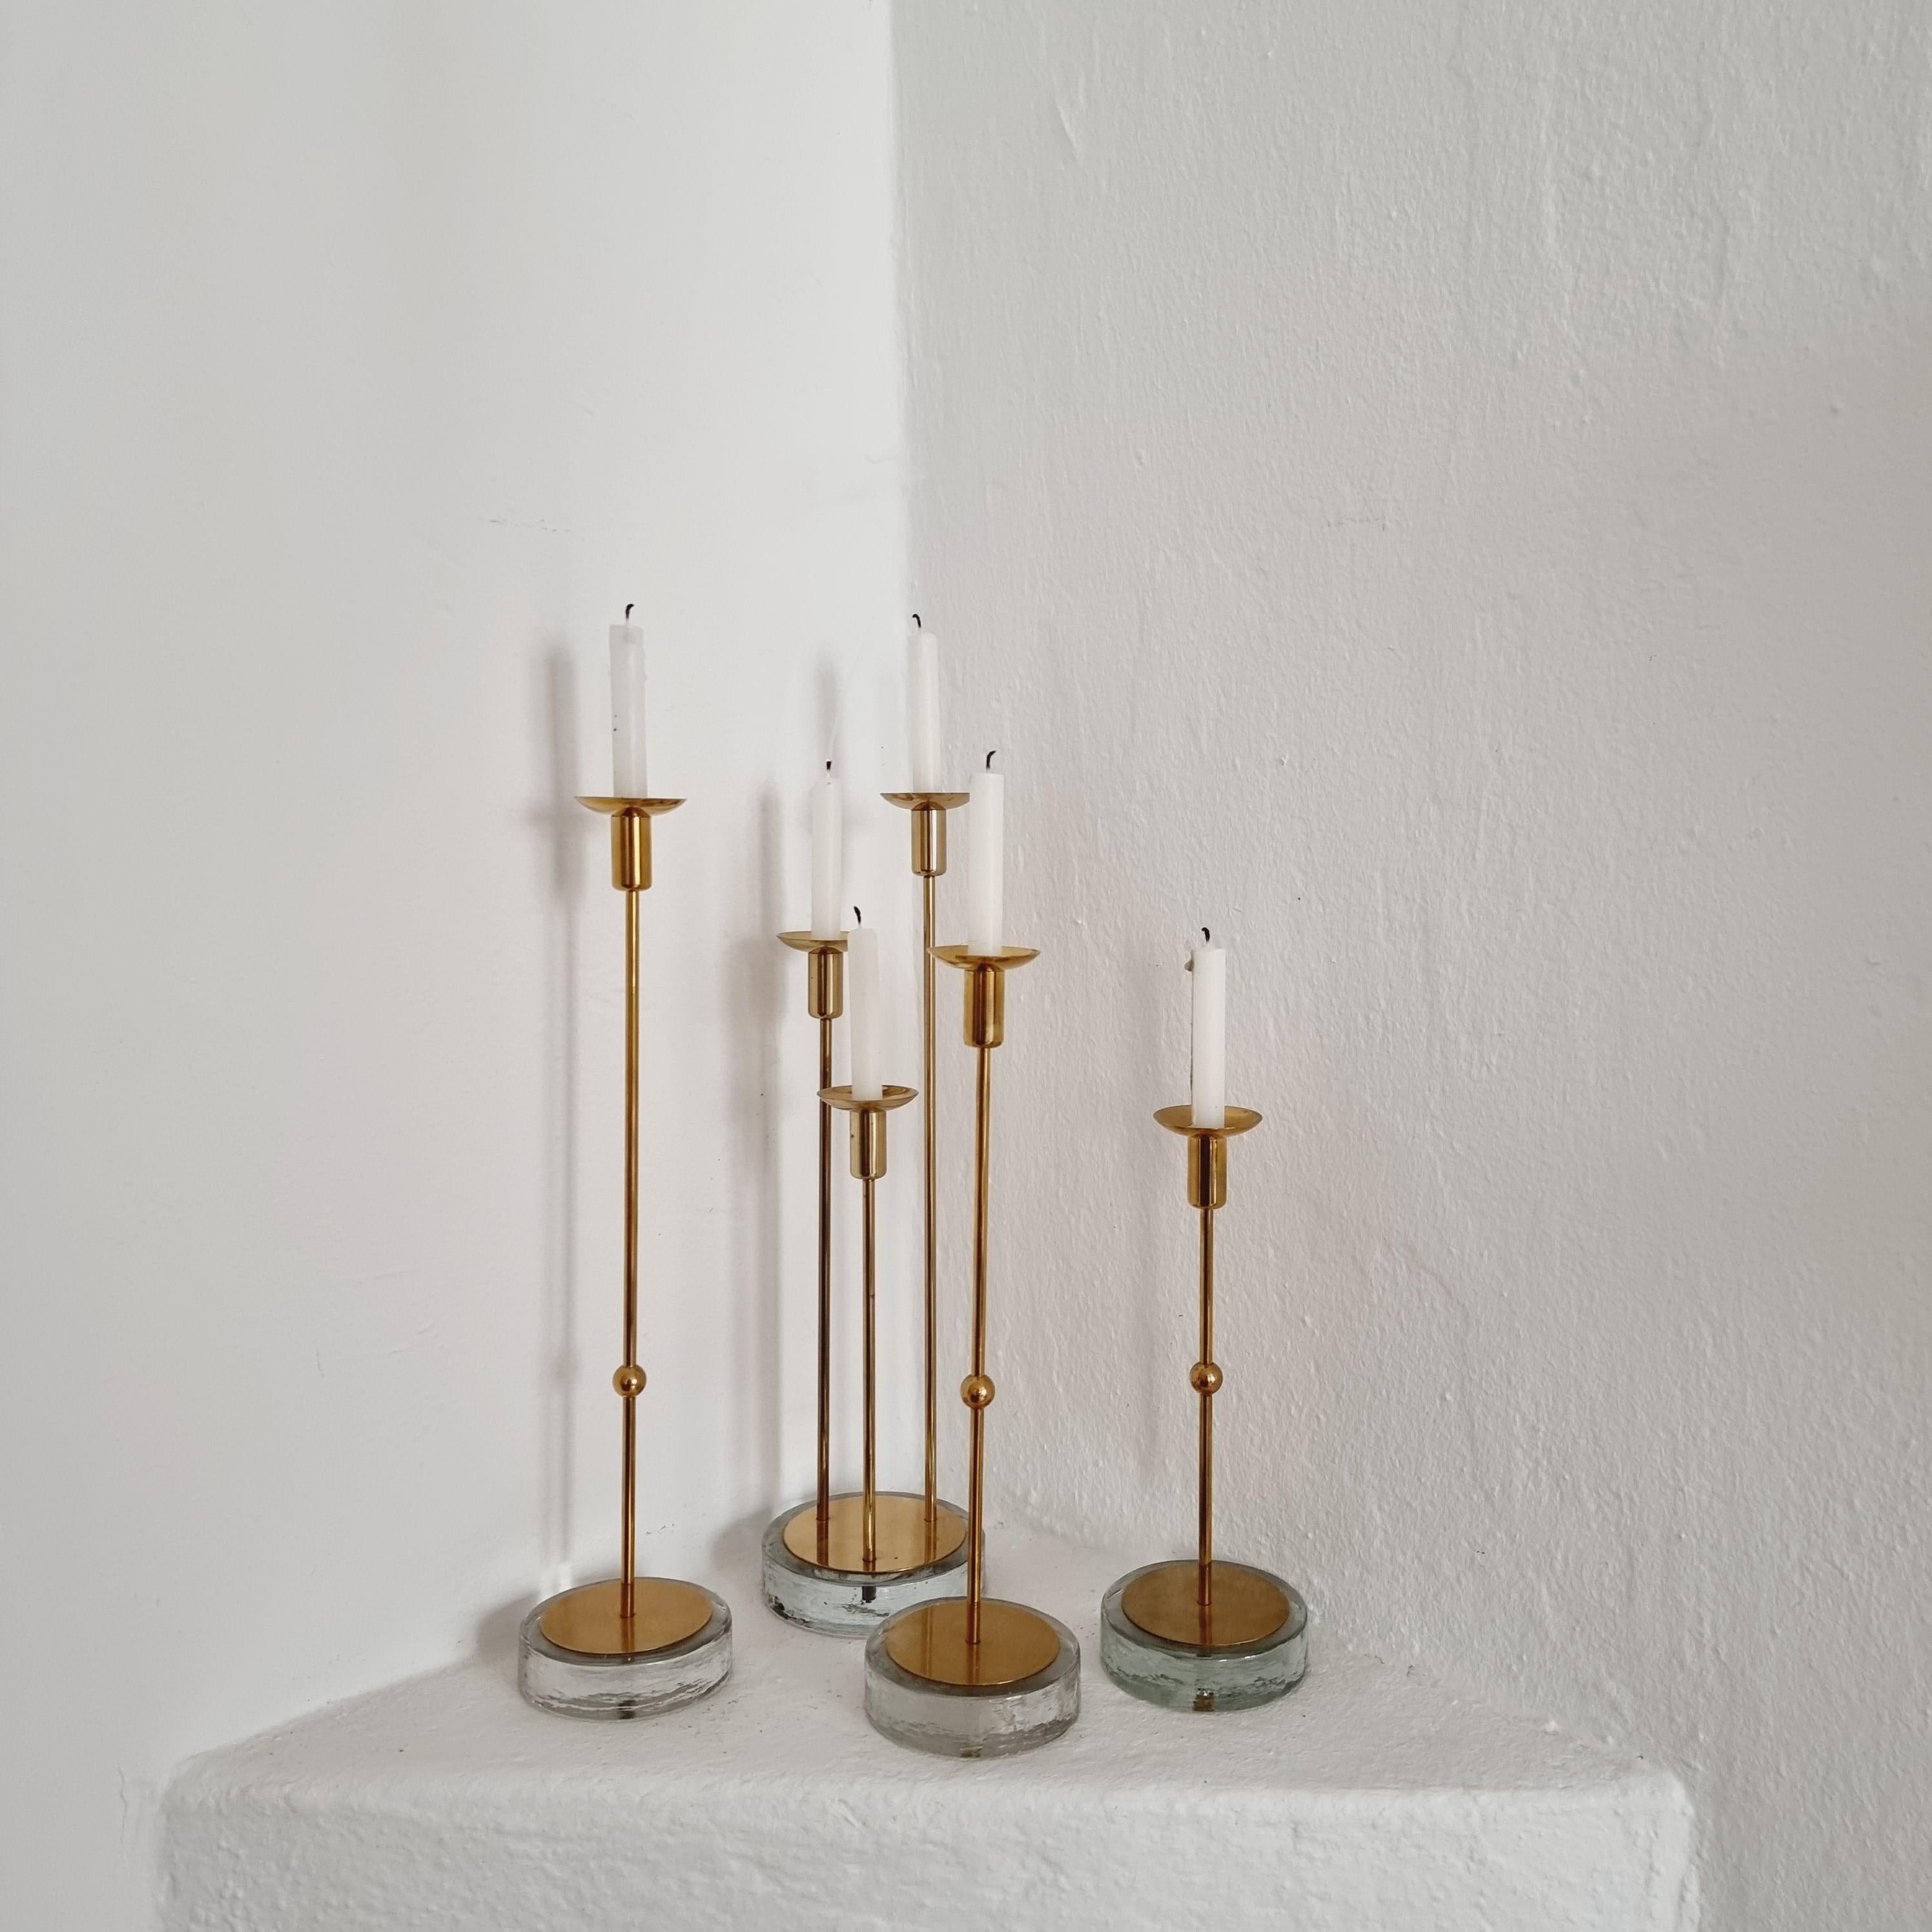 Gunnar Ander, Four Candle Holders, Brass & Glass, Ystad Metall, Swedish Modern For Sale 2